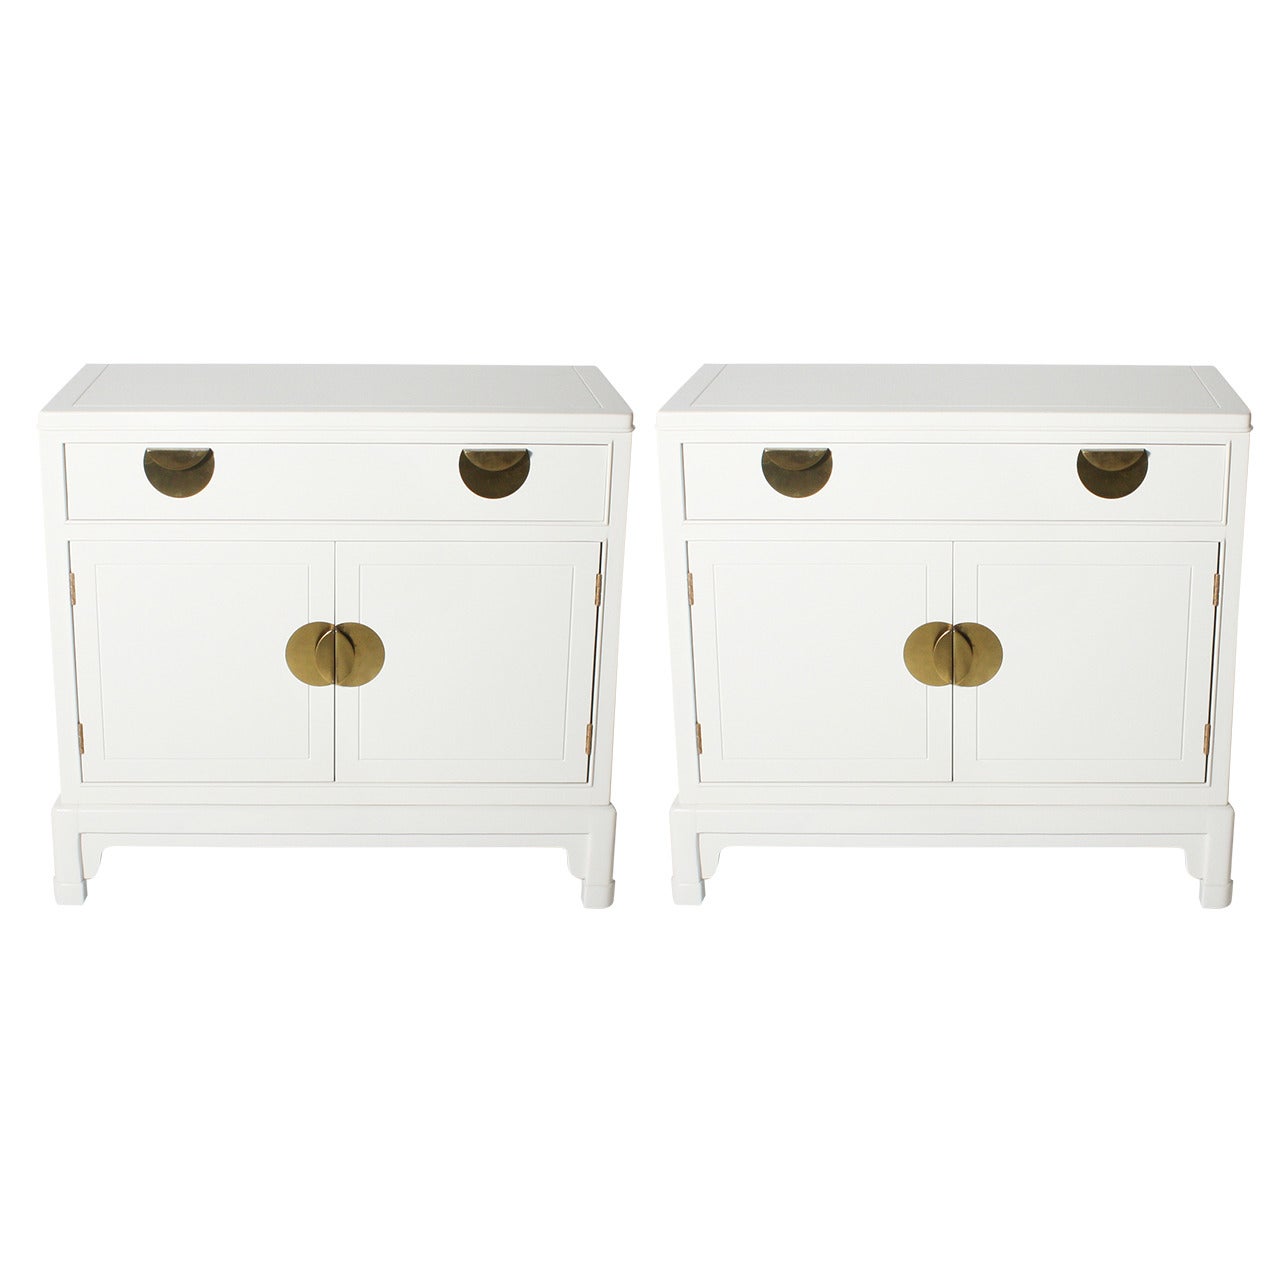 Pair of Commodes with Brass Pulls, circa 1970